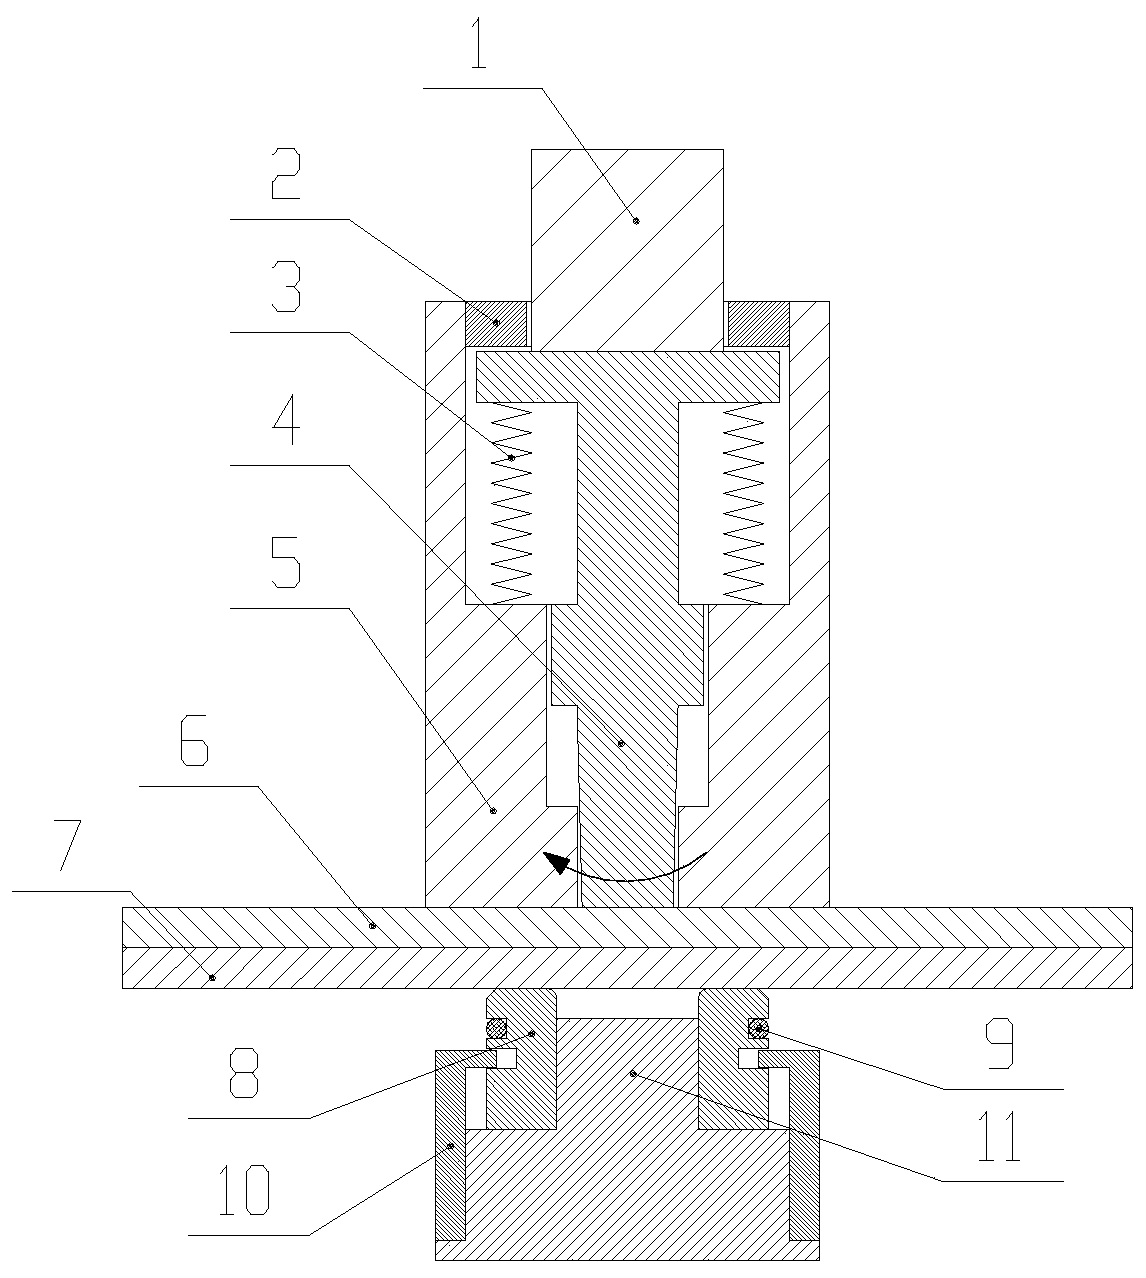 A slider-type die frictionless riveting connection method for lightweight plates